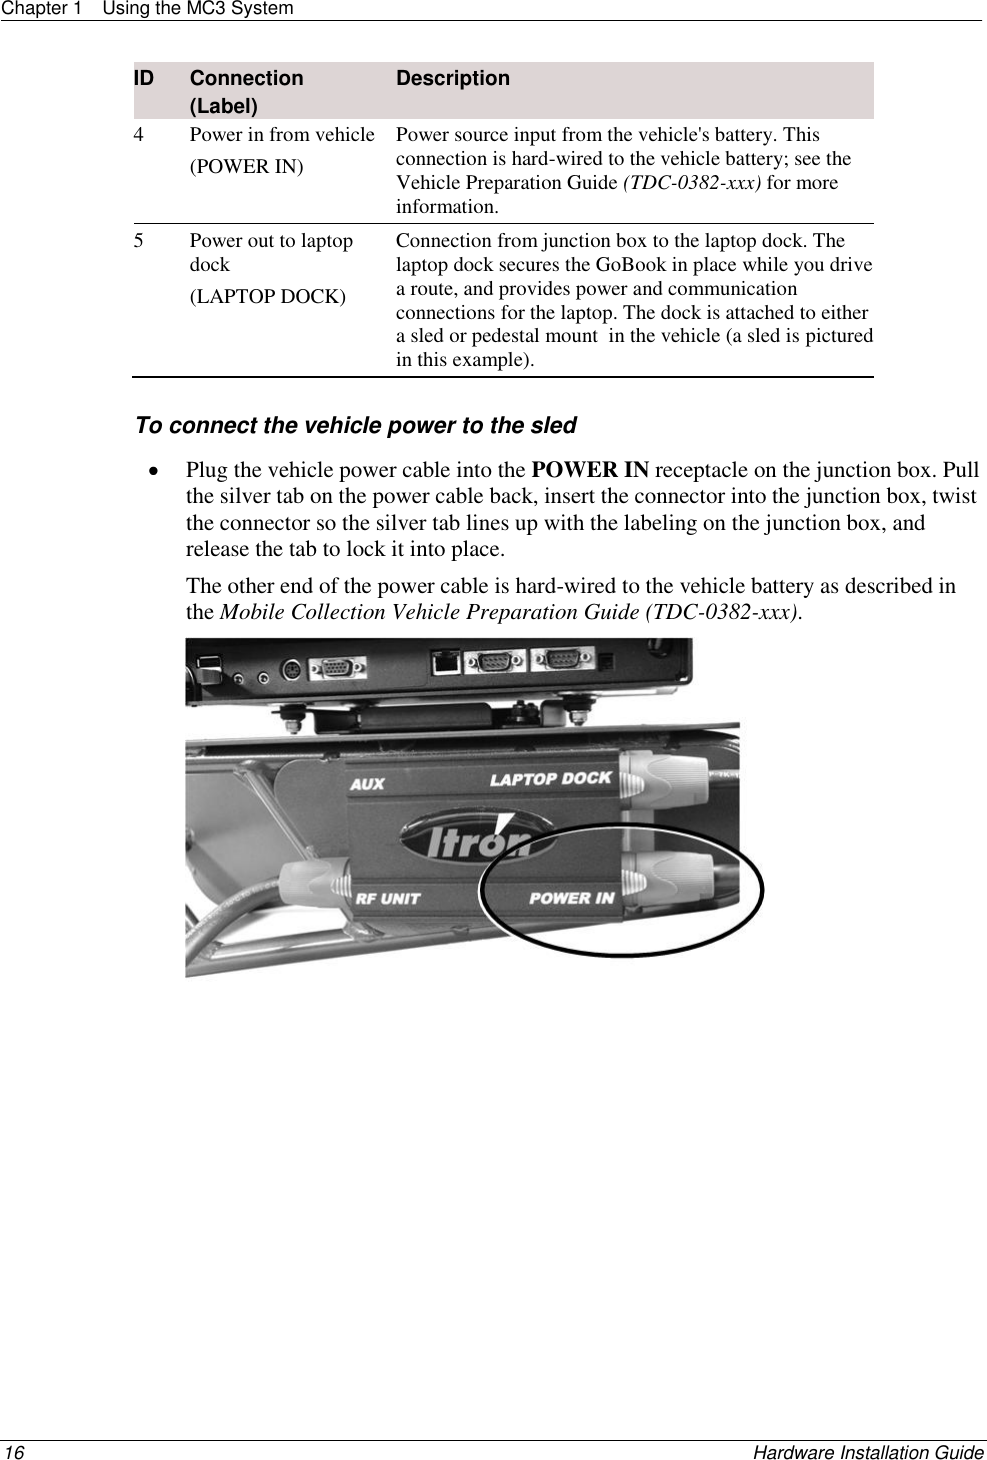 Chapter 1  Using the MC3 System  16    Hardware Installation Guide  ID Connection   (Label)  Description 4 Power in from vehicle (POWER IN) Power source input from the vehicle&apos;s battery. This connection is hard-wired to the vehicle battery; see the Vehicle Preparation Guide (TDC-0382-xxx) for more information. 5 Power out to laptop dock (LAPTOP DOCK) Connection from junction box to the laptop dock. The laptop dock secures the GoBook in place while you drive a route, and provides power and communication connections for the laptop. The dock is attached to either a sled or pedestal mount  in the vehicle (a sled is pictured in this example).    To connect the vehicle power to the sled  Plug the vehicle power cable into the POWER IN receptacle on the junction box. Pull the silver tab on the power cable back, insert the connector into the junction box, twist the connector so the silver tab lines up with the labeling on the junction box, and release the tab to lock it into place. The other end of the power cable is hard-wired to the vehicle battery as described in the Mobile Collection Vehicle Preparation Guide (TDC-0382-xxx).    